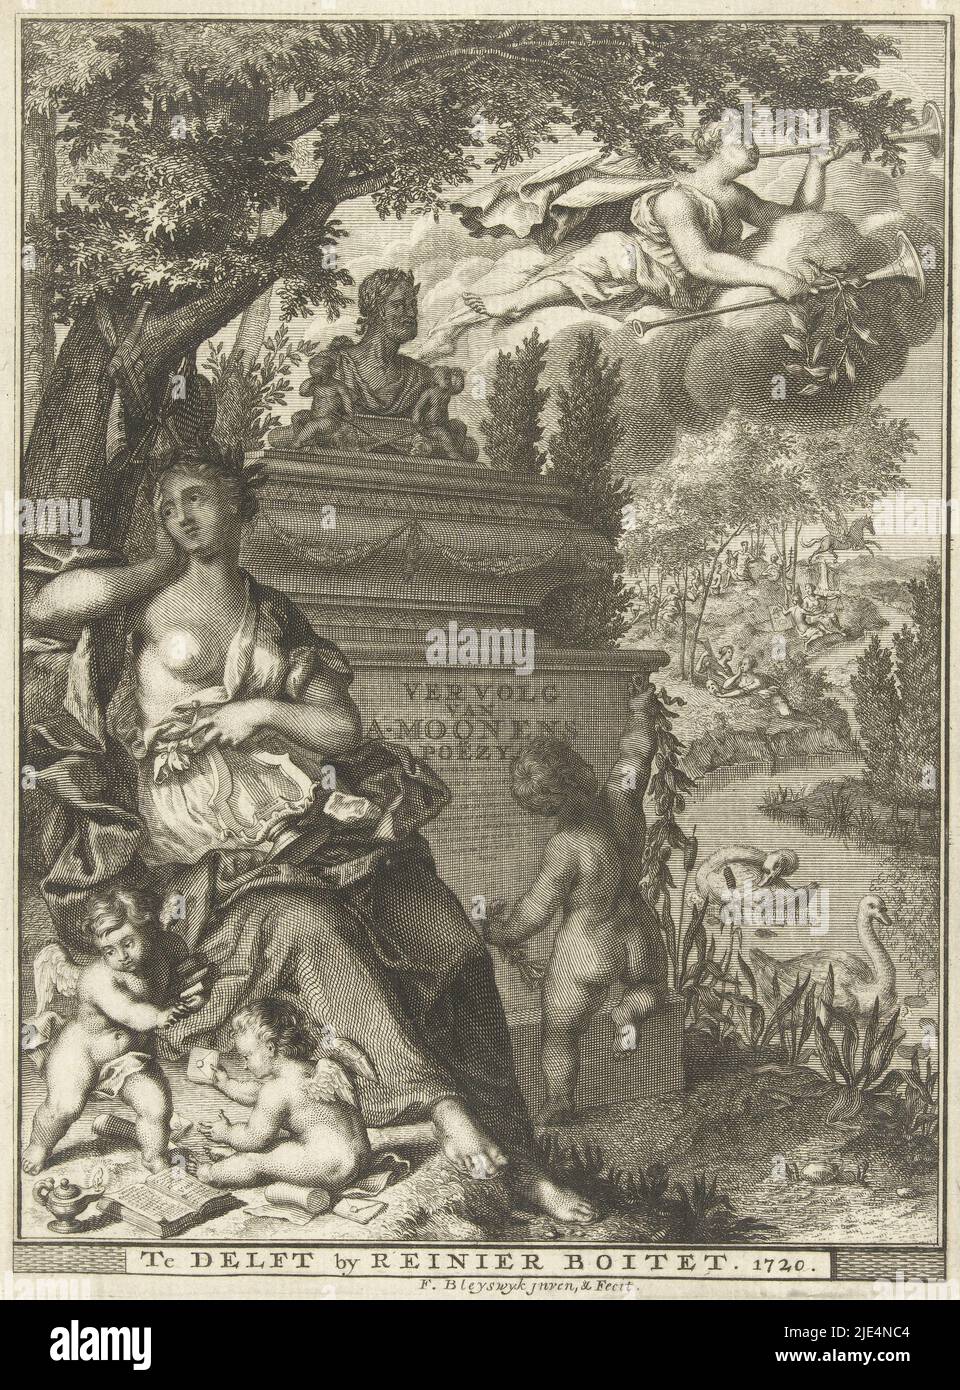 A muse and putti are seated near the tomb of poet Arnold Moonen. On a cloud lies Fame, she blows on a trumpet. The landscape in the background shows Mount Parnassus with its muses and Pegasus, while a muse and putti are sitting next to the tomb of poet Arnold Moonen Title page: Arnold Moonen, Sequel to Poetry, Delft 1720 Sequel to A. Moonen's Poetry, print maker: François van Bleyswijck, (mentioned on object), François van Bleyswijck, (mentioned on object), publisher: Reinier Boitet, (mentioned on object), print maker: Leiden, publisher: Delft, 1720, paper, etching, engraving, h 186 mm × w 139 Stock Photo